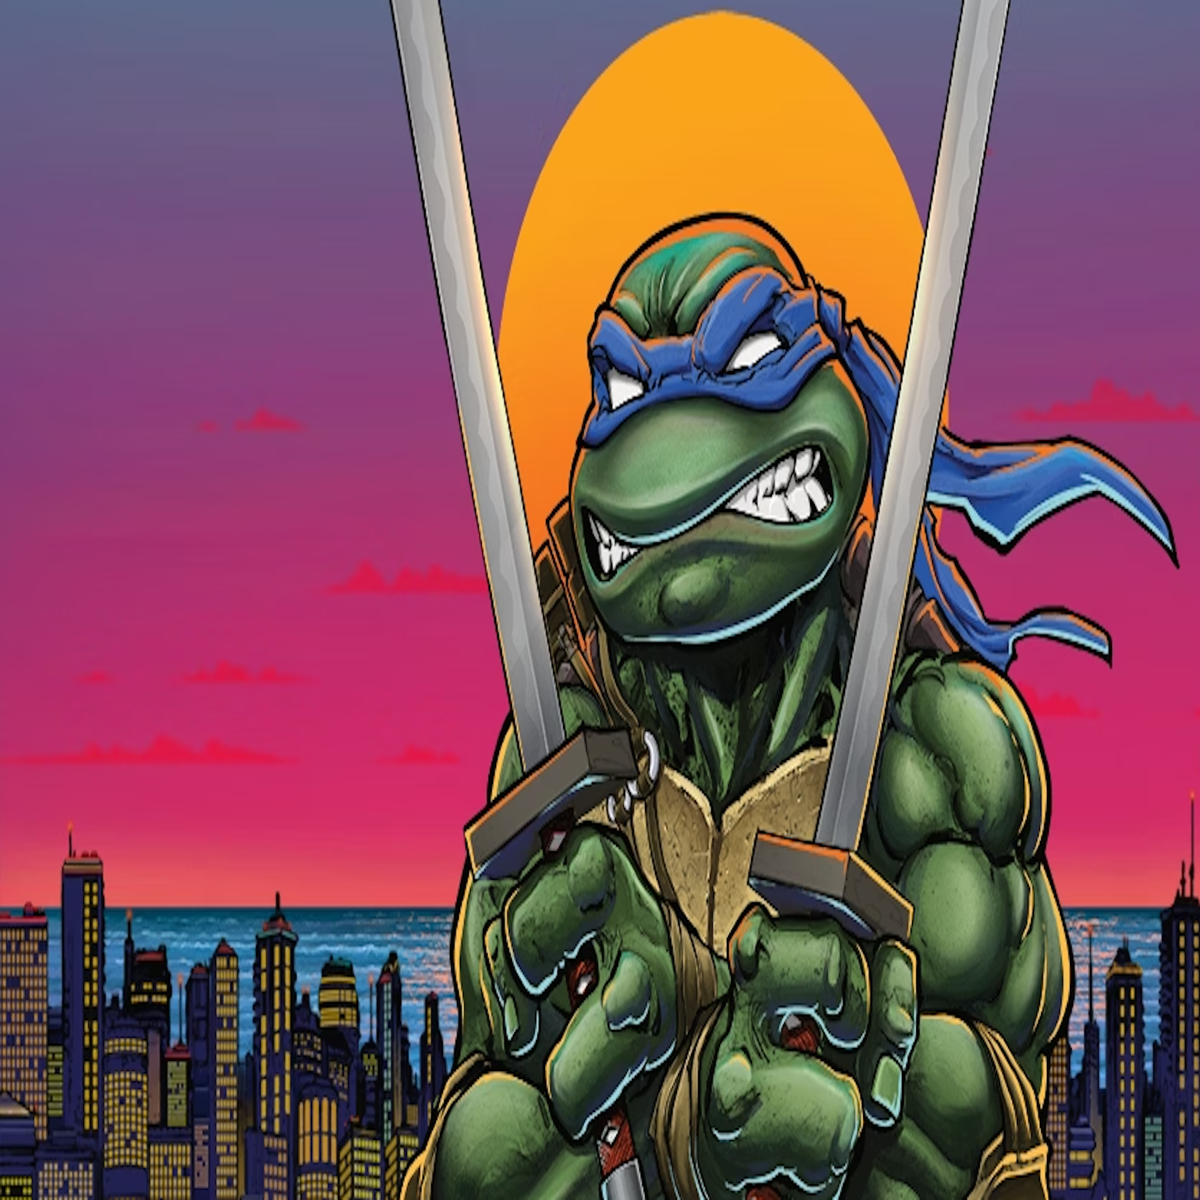 https://assetsio.reedpopcdn.com/teenage-mutant-ninja-turtles-and-other-strangeness-rpg-cover-art-kickstarter.png?width=1200&height=1200&fit=crop&quality=100&format=png&enable=upscale&auto=webp